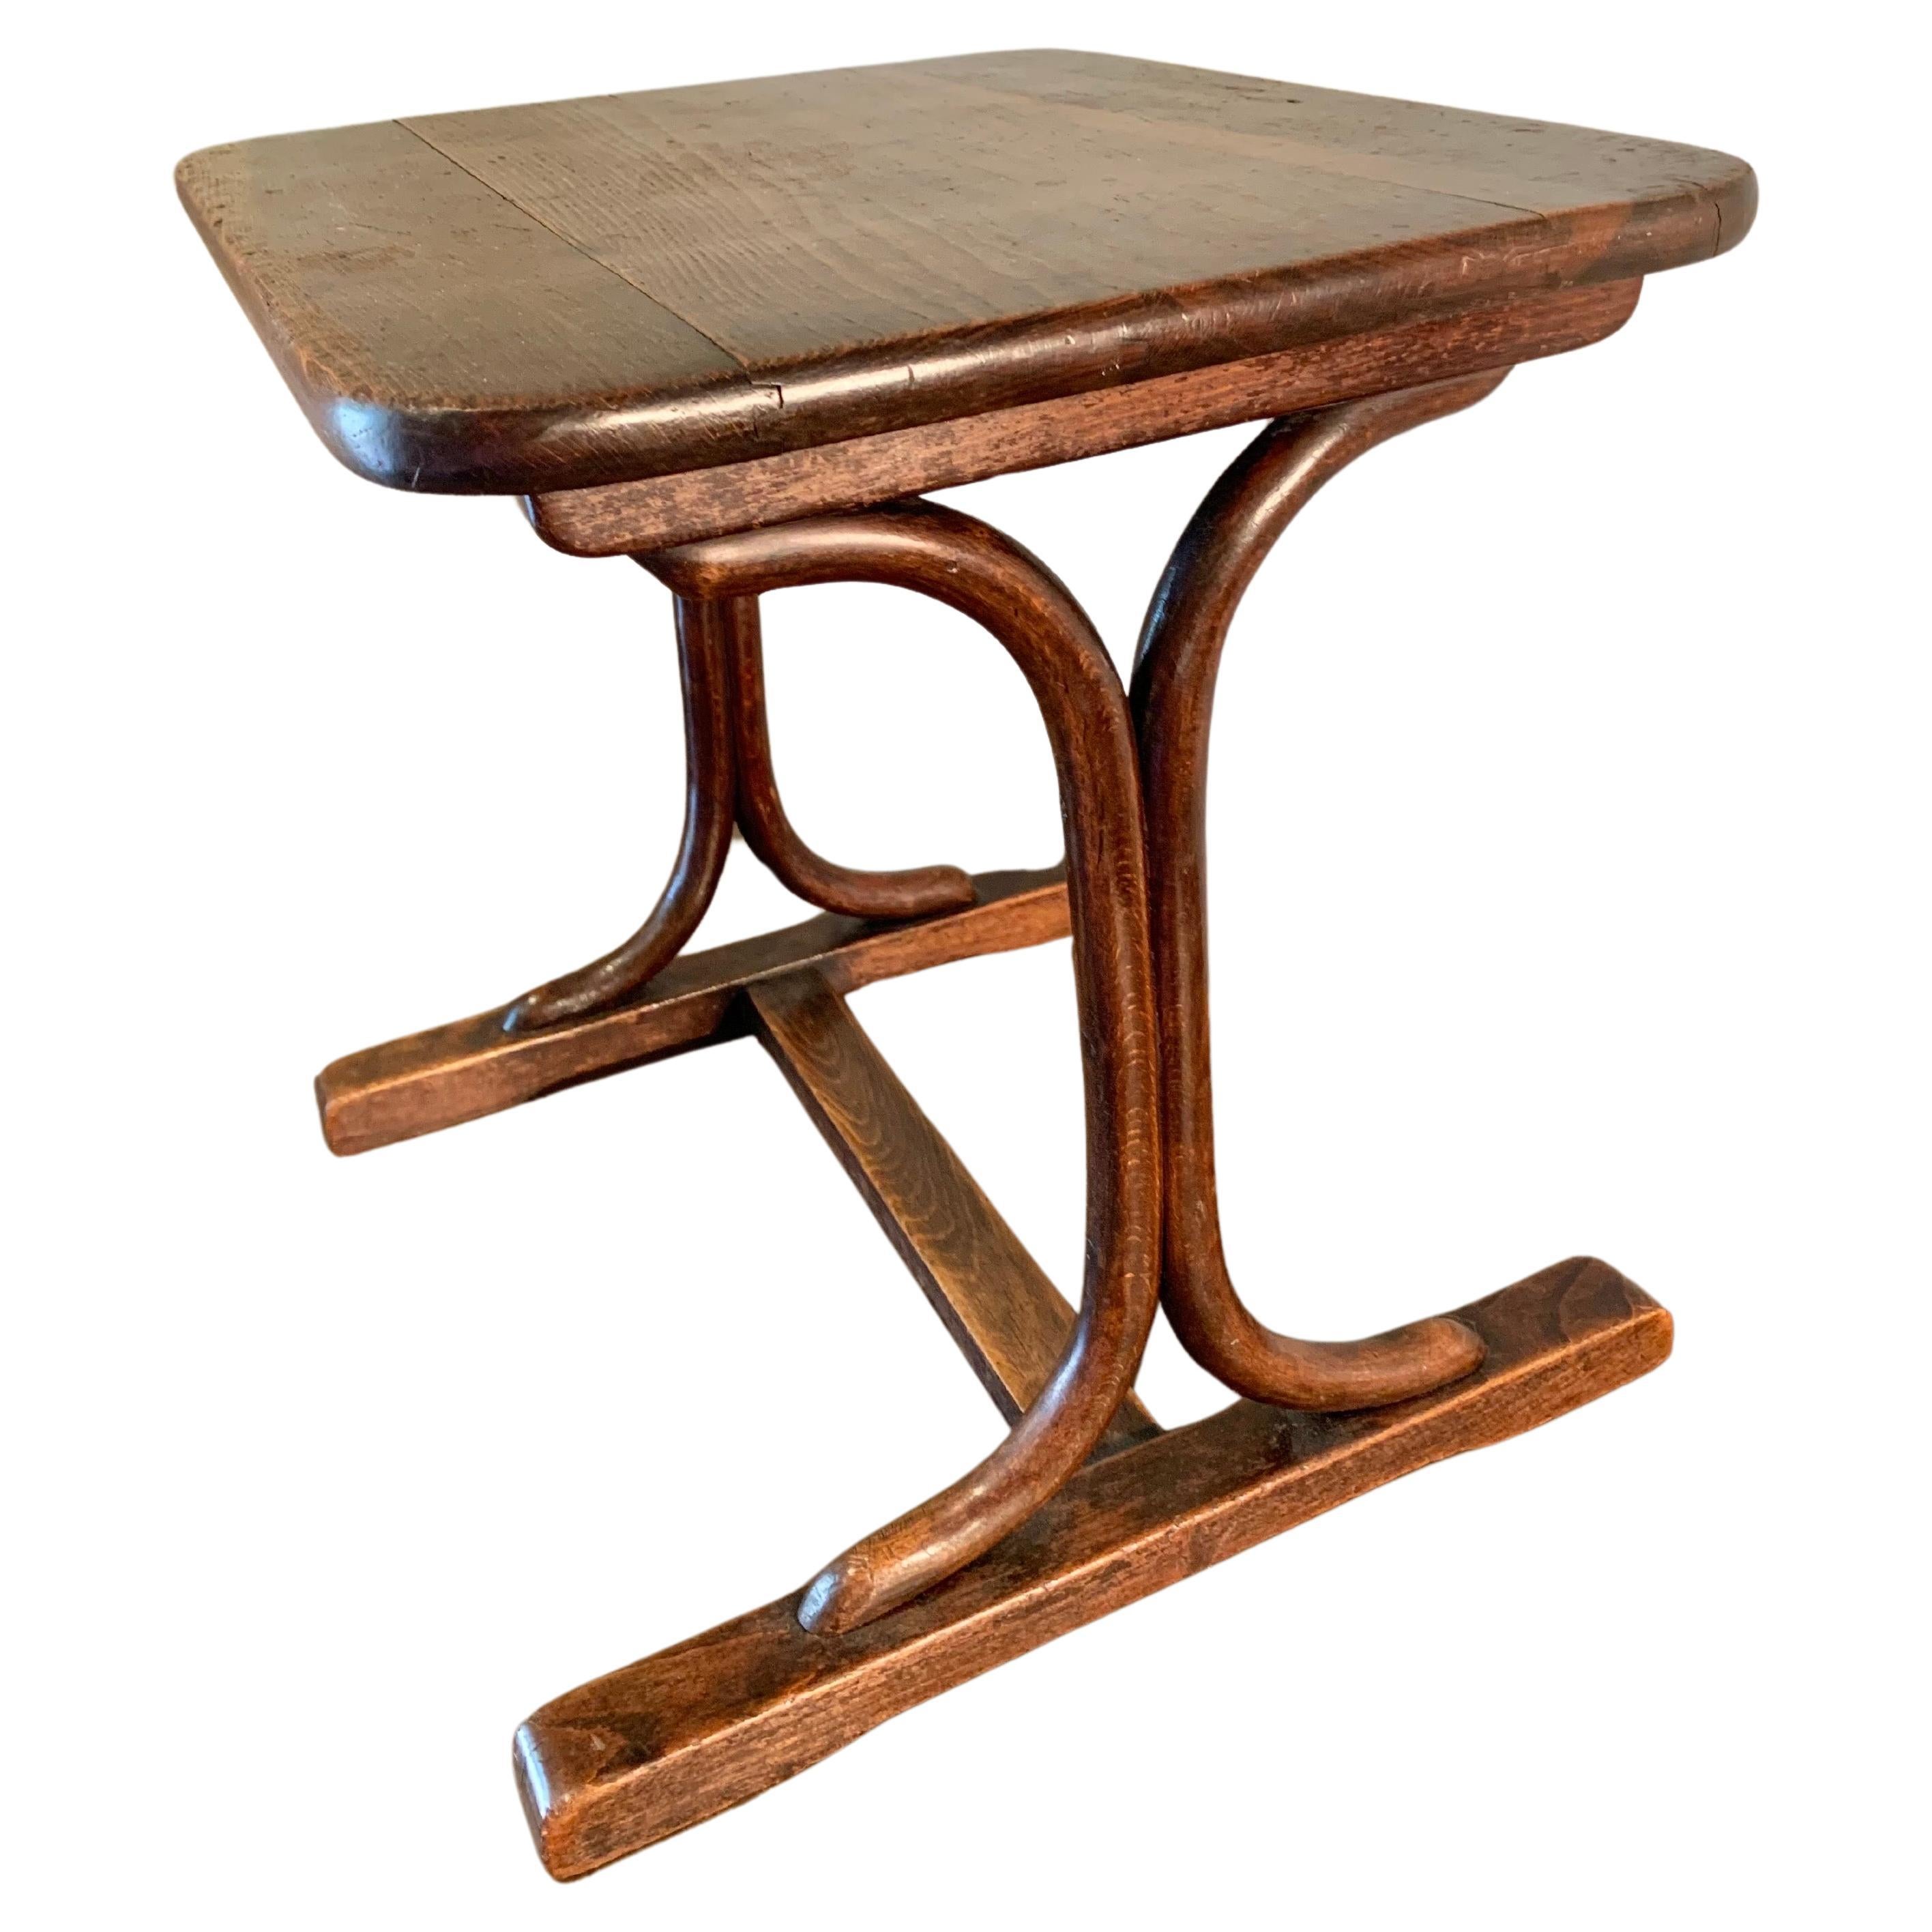 Found in the South of France, this Early 20th Century French Bentwood Trestle Side Table was crafted from walnut in the early 1900's. The side table features a rectangular top with rounded corners that is supported on two shaped bentwood trestles